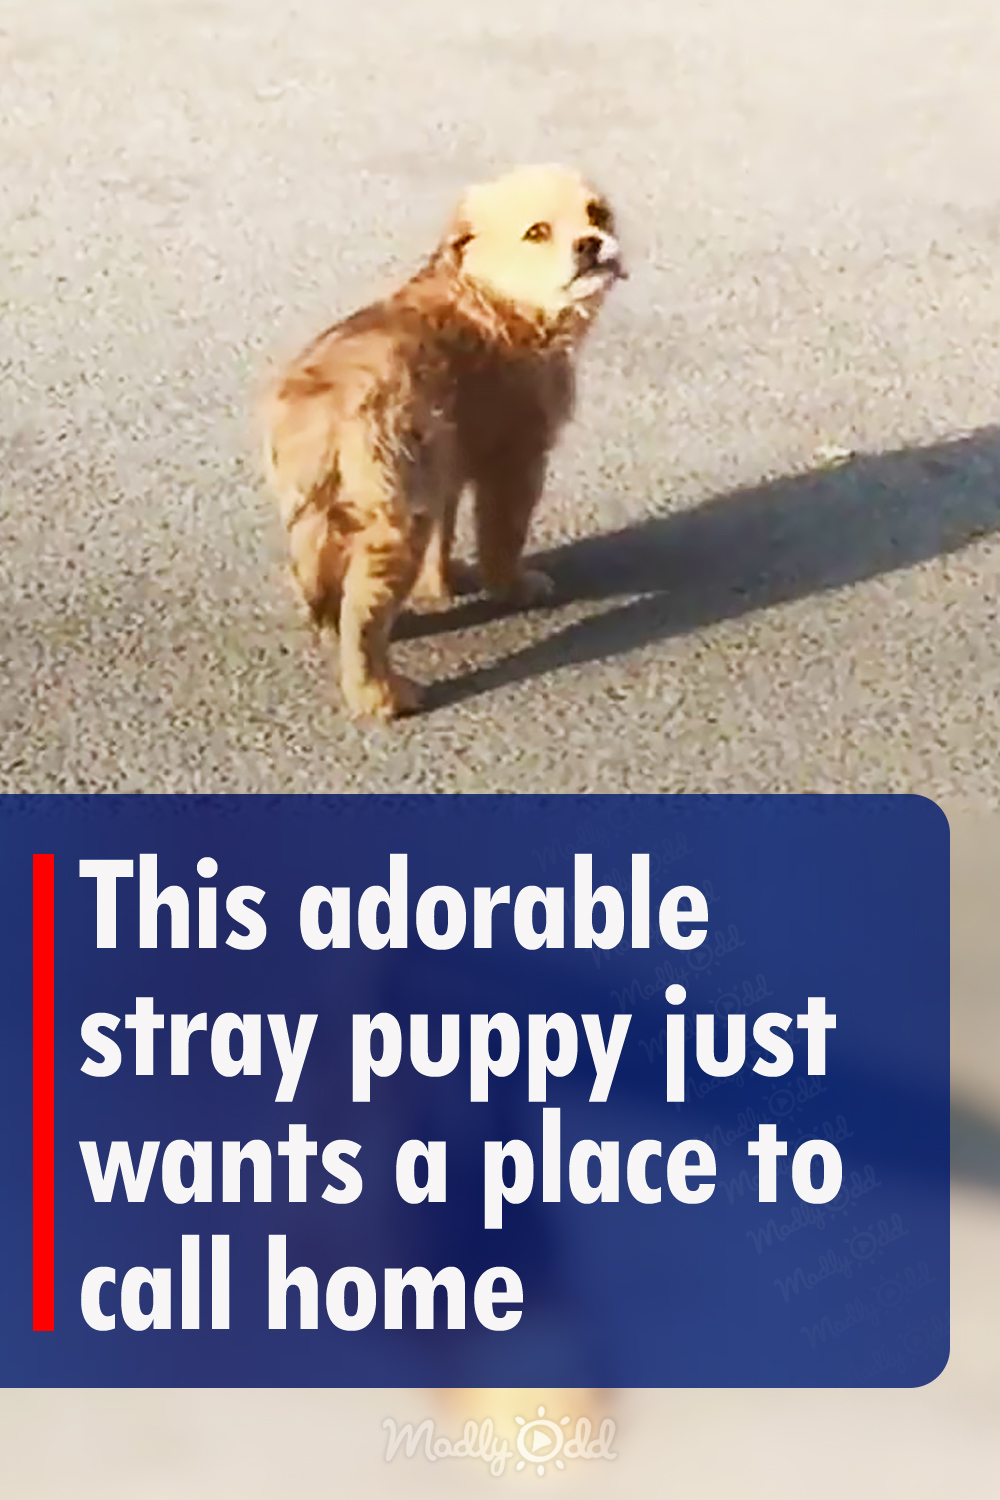 This adorable stray puppy just wants a place to call home